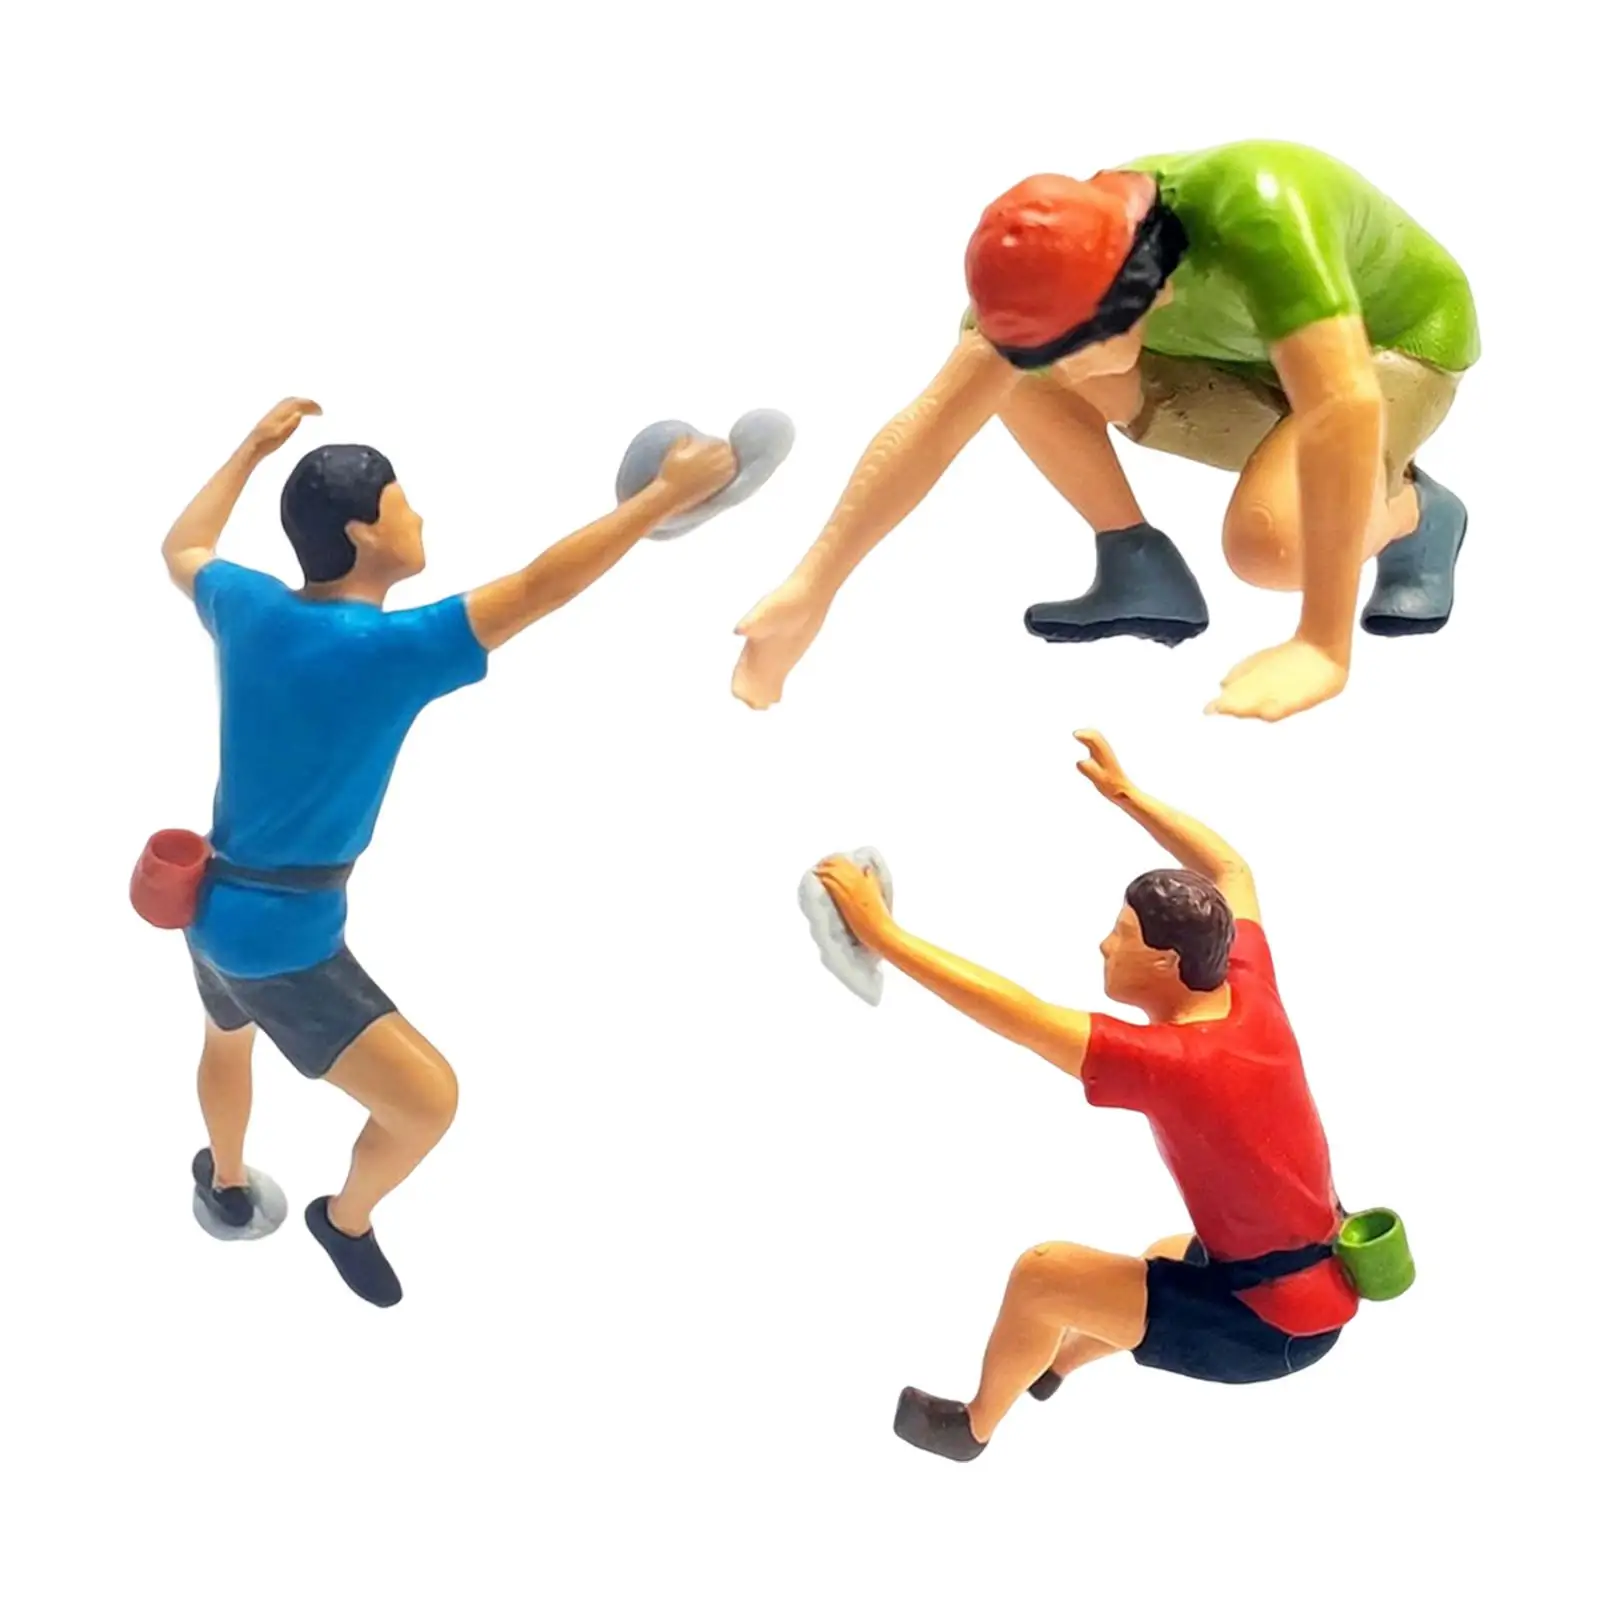 3Pcs Hand Painted 1/87 Rock Climbing Figures People Model Micro Landscape Dioramas Movie Props Miniature DIY Projects Decoration